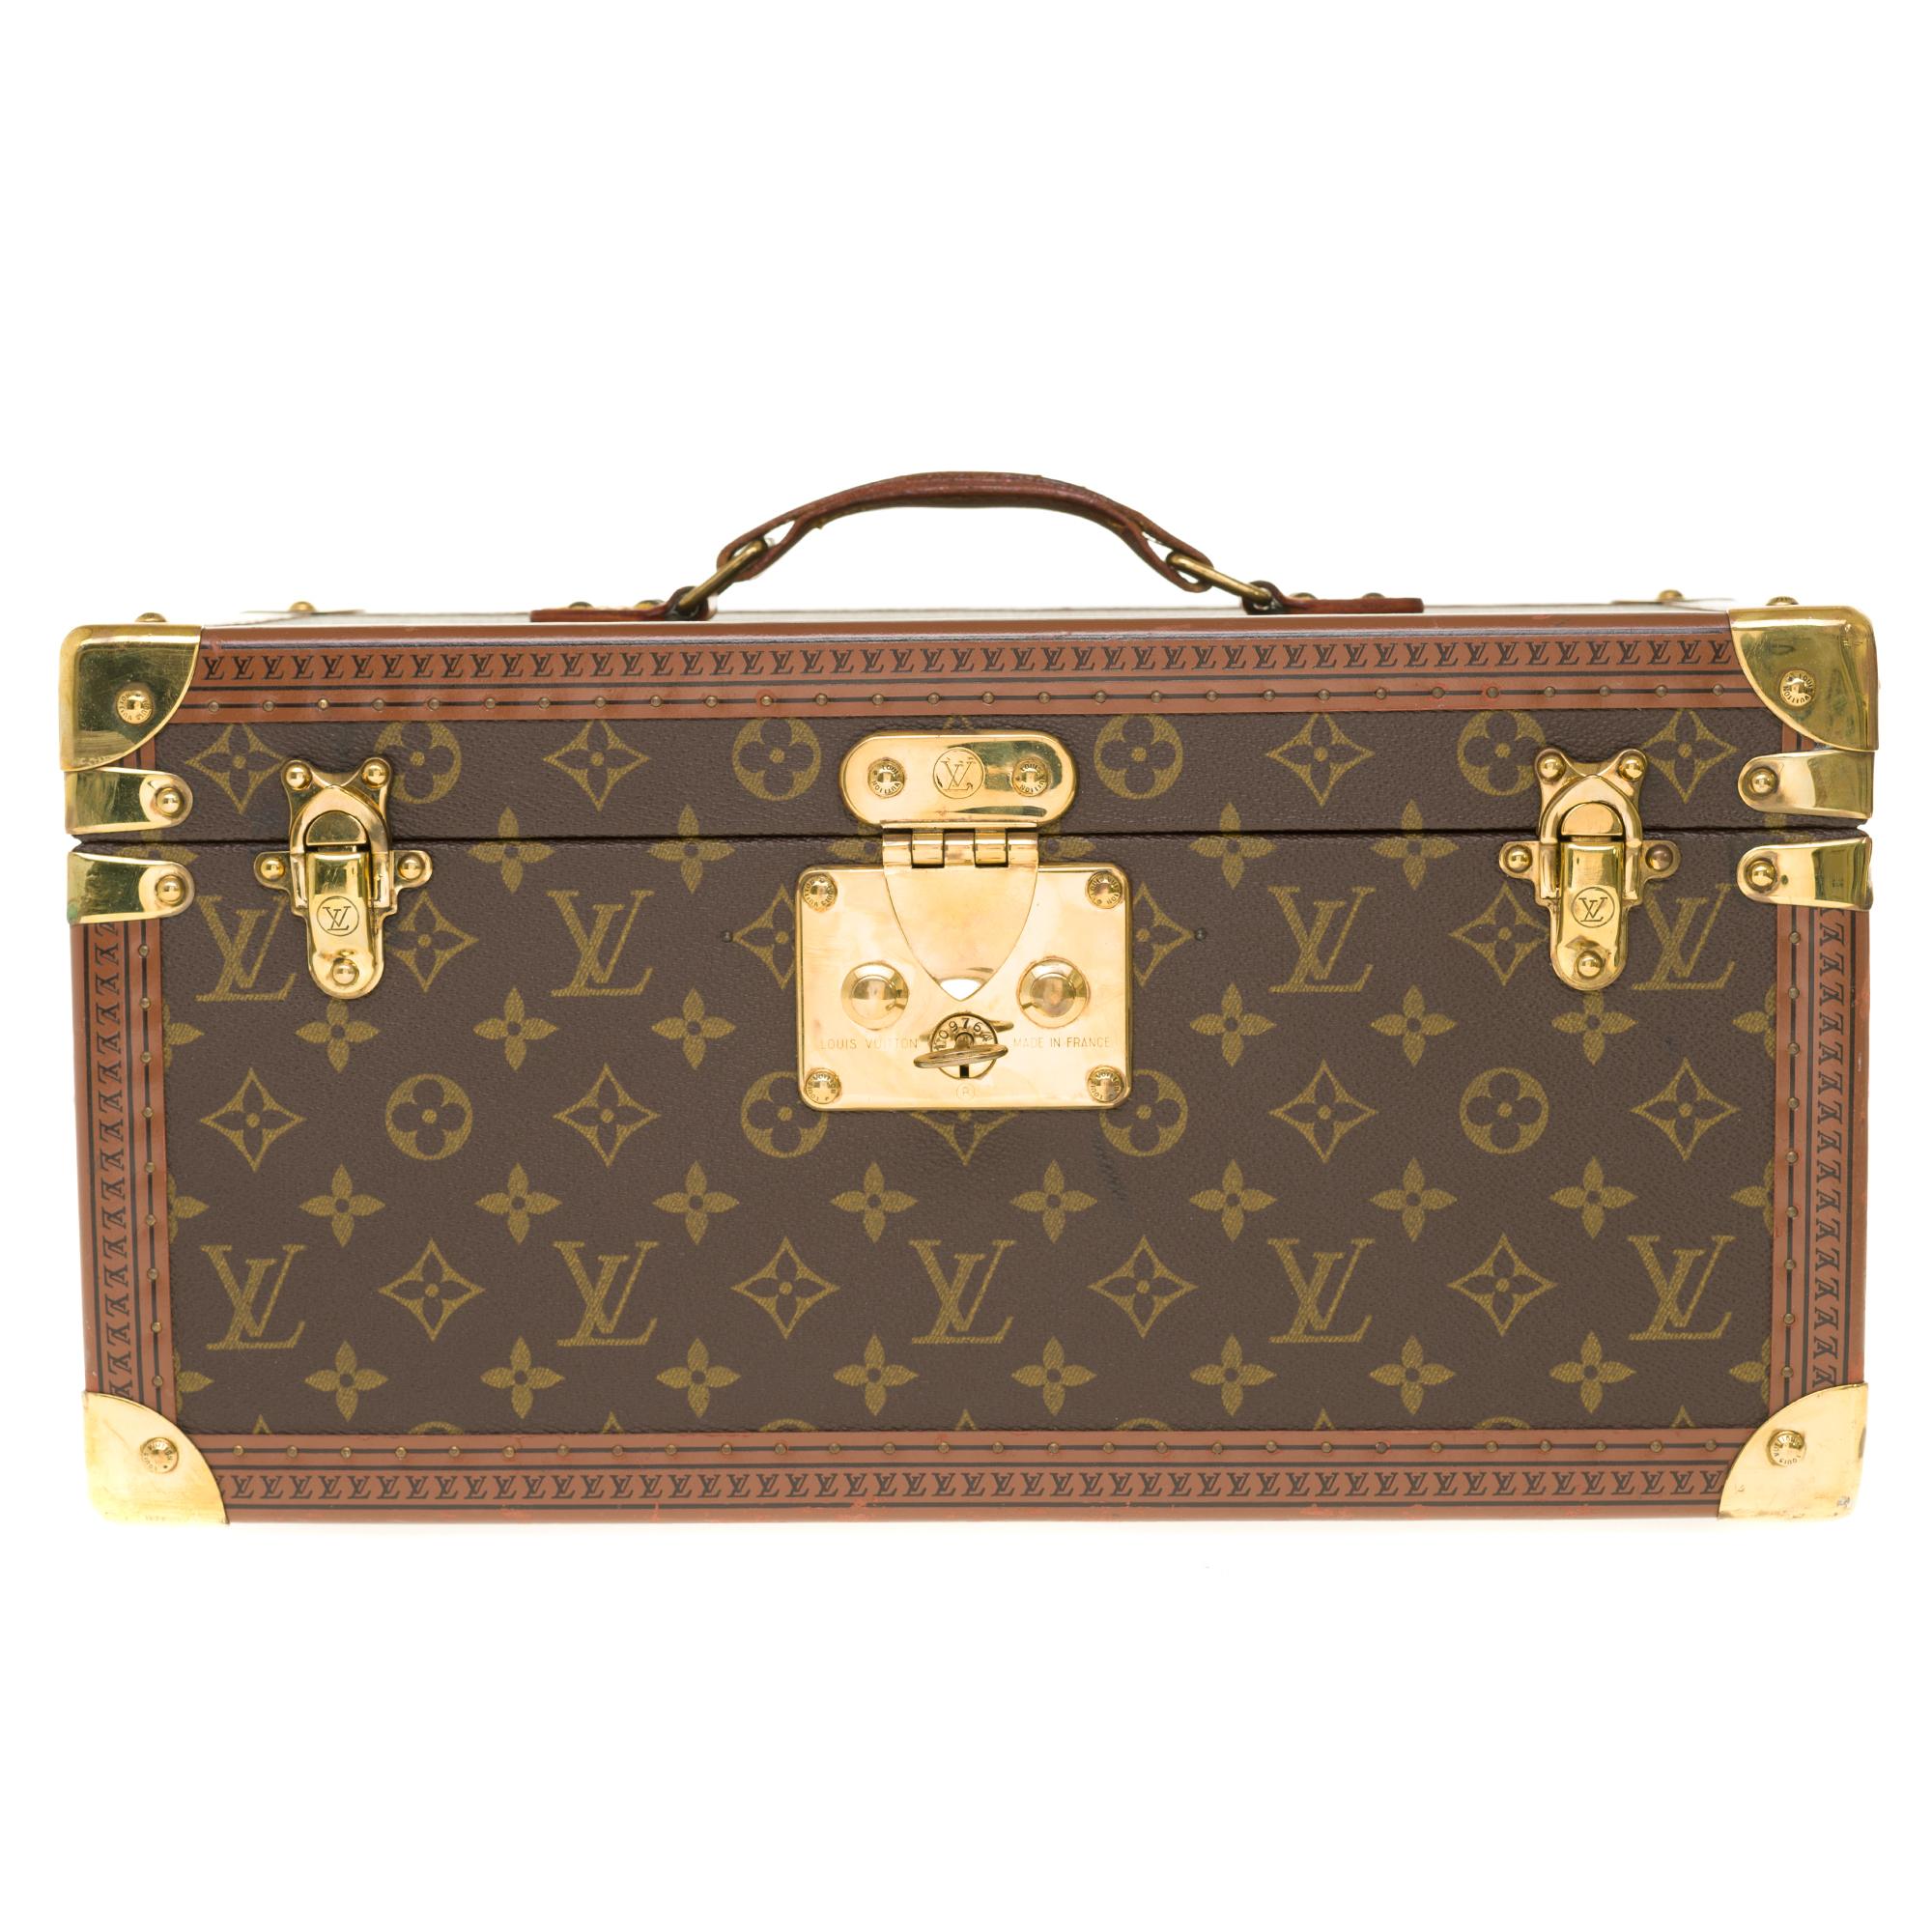 Vanity Case Louis Vuitton in brown monogram canvas and lozine, brass hardware, simple handle in natural leather allowing a handheld. 
Fastening by latches and lock closure.
Lining in beige vuittonite, 12 compartments by leather straps.
Dimensions: